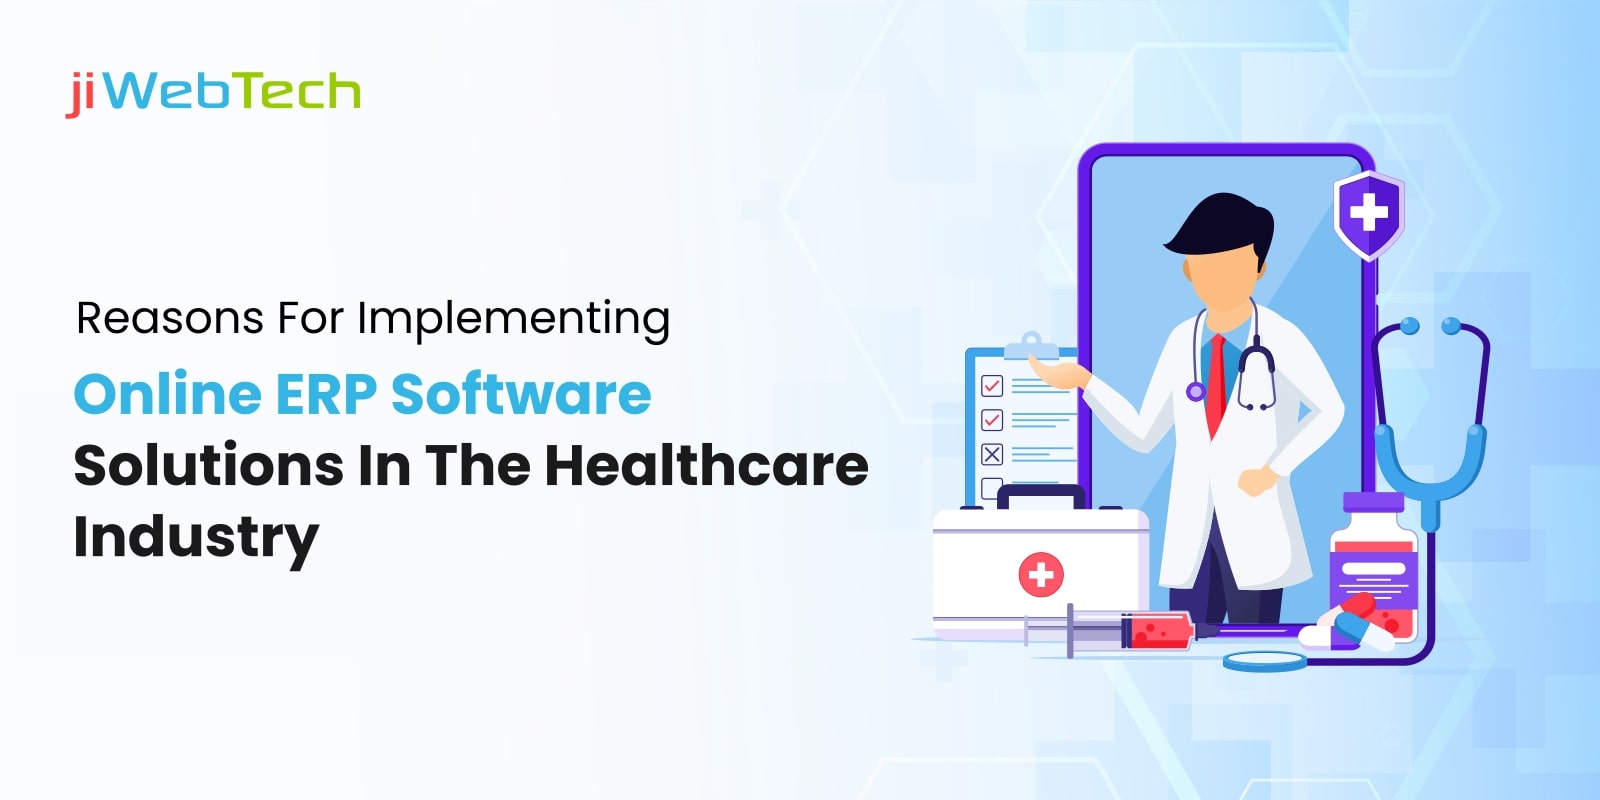 Reasons Of Implementing Online ERP Software Solutions In Healthcare Industry